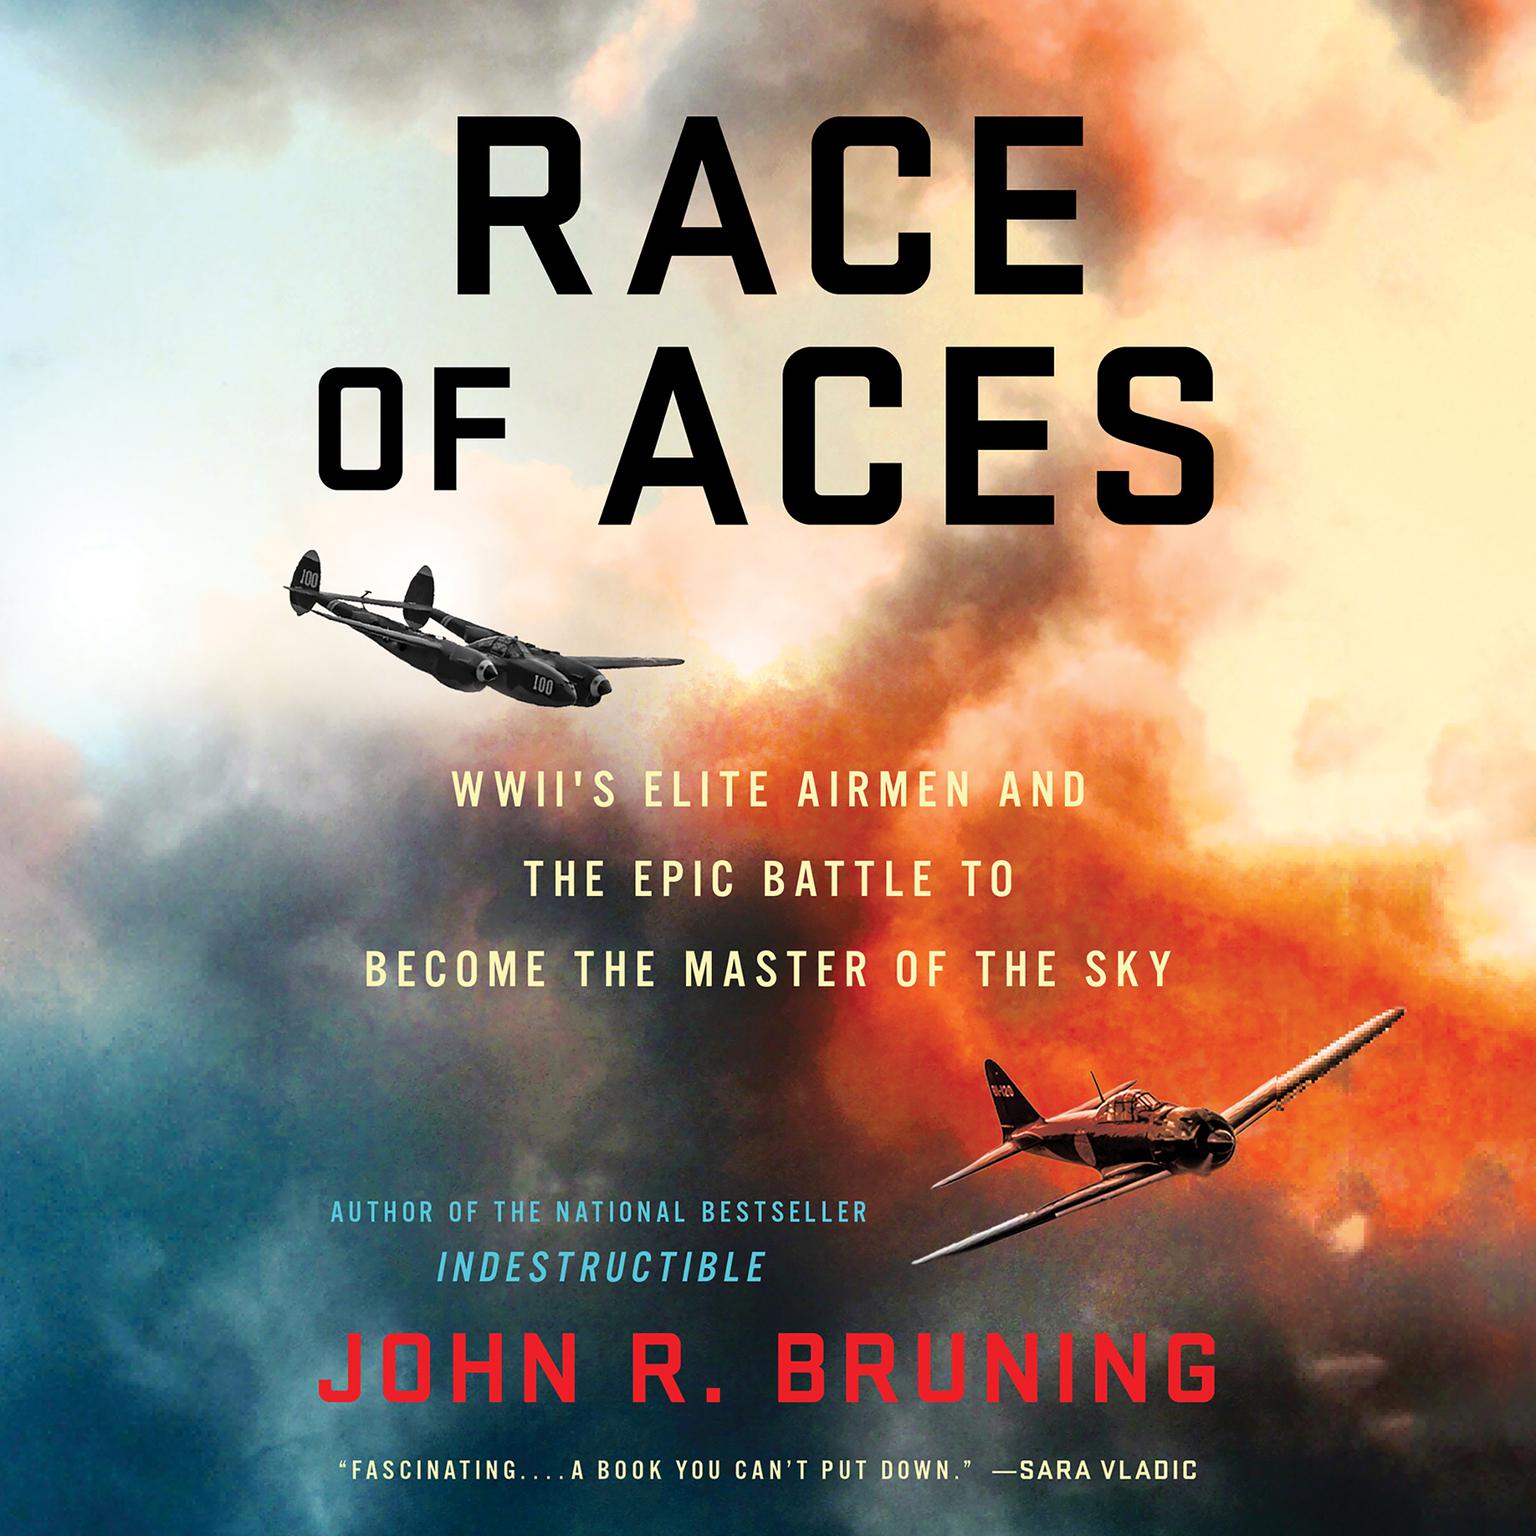 Race of Aces: WWIIs Elite Airmen and the Epic Battle to Become the Master of the Sky Audiobook, by John R. Bruning